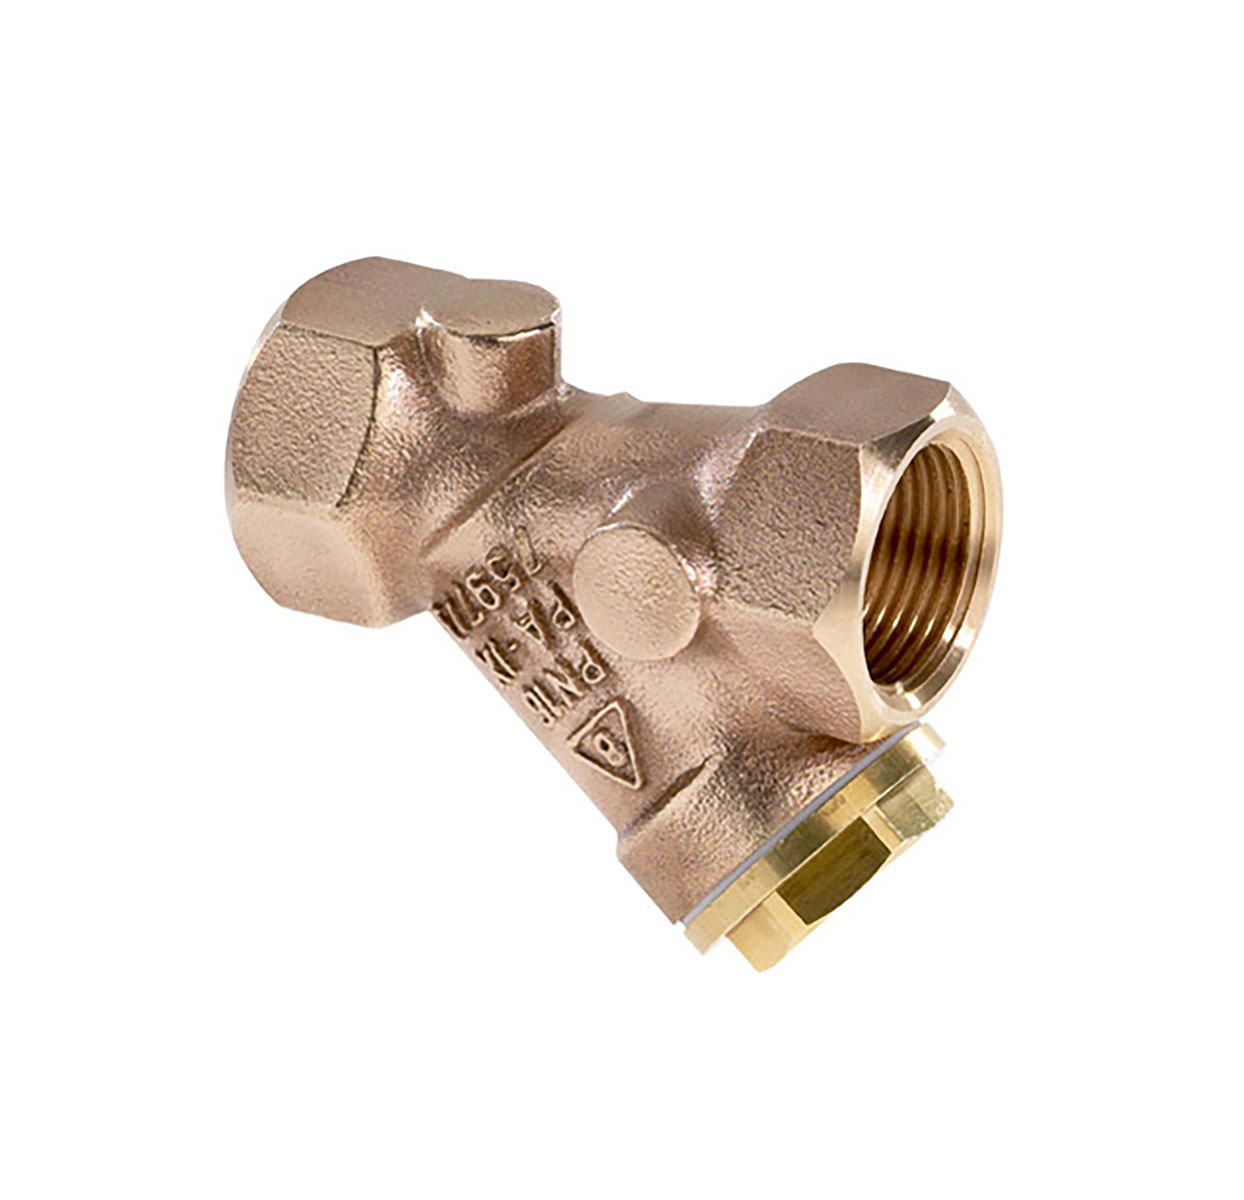 2450150 - Red-brass Strainer Strainer with PTFE-sealing (Teflon)